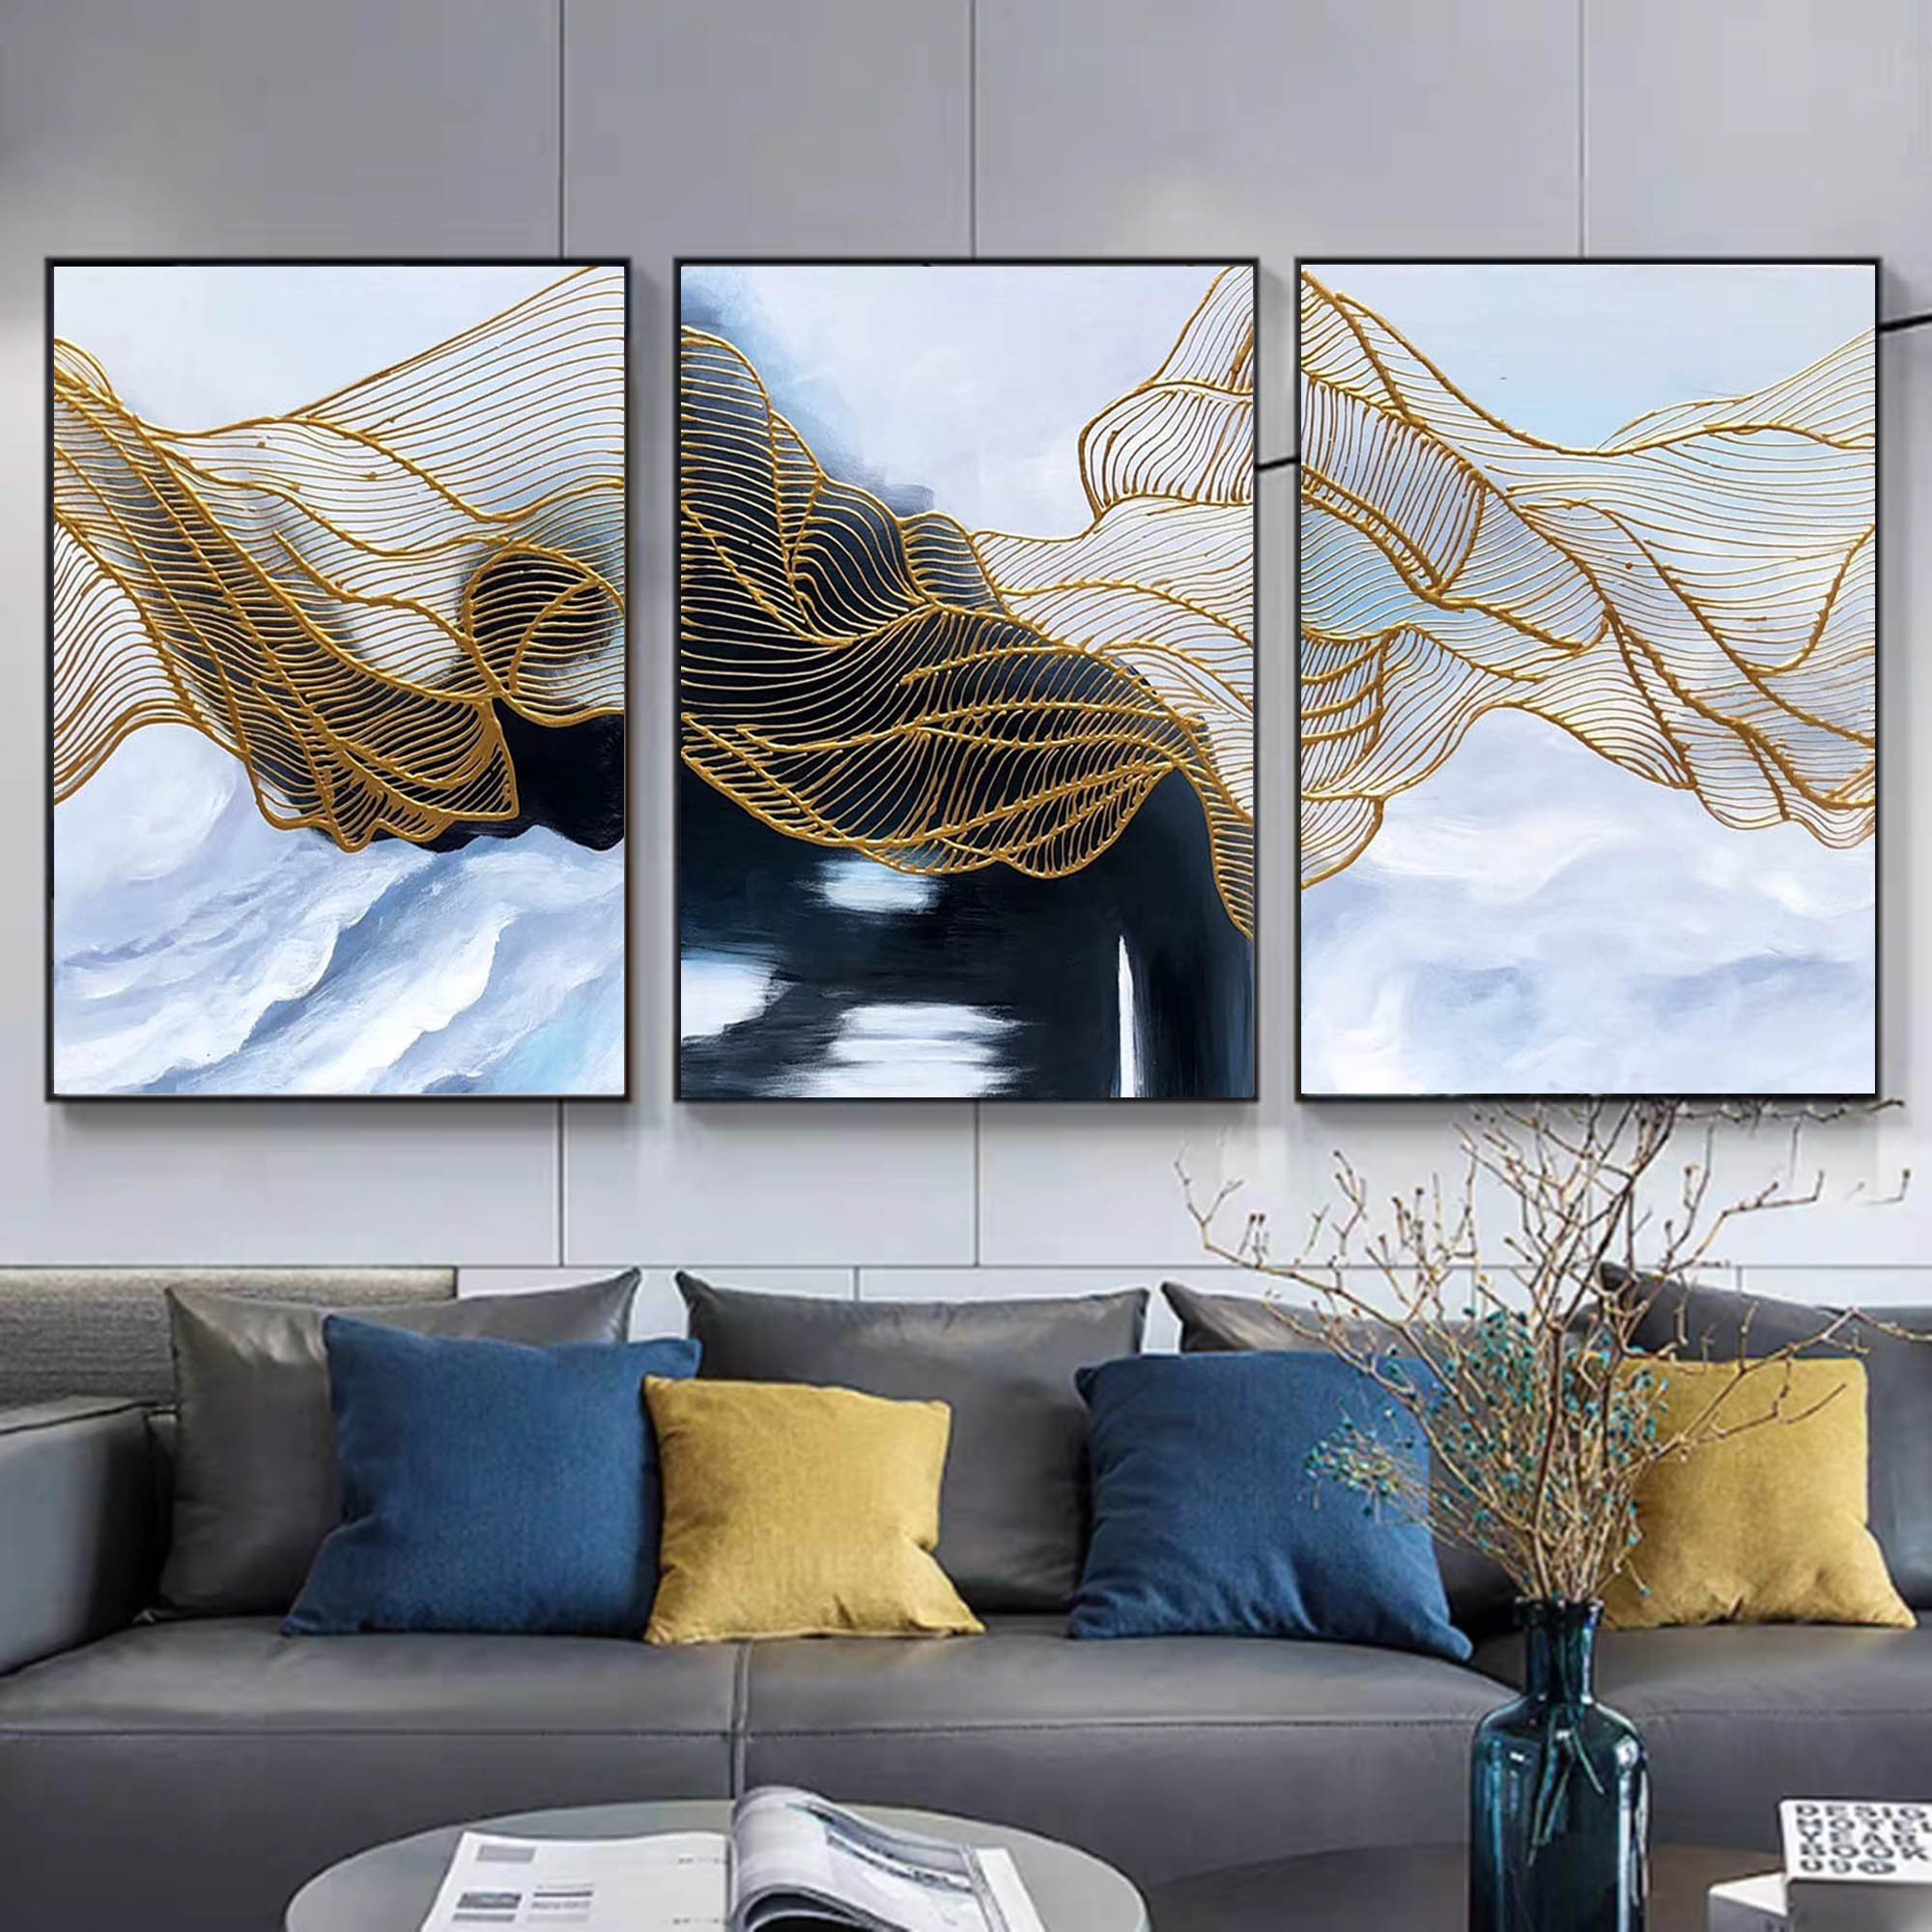 Set of 3 painting large canvas art living room wall art | Etsy